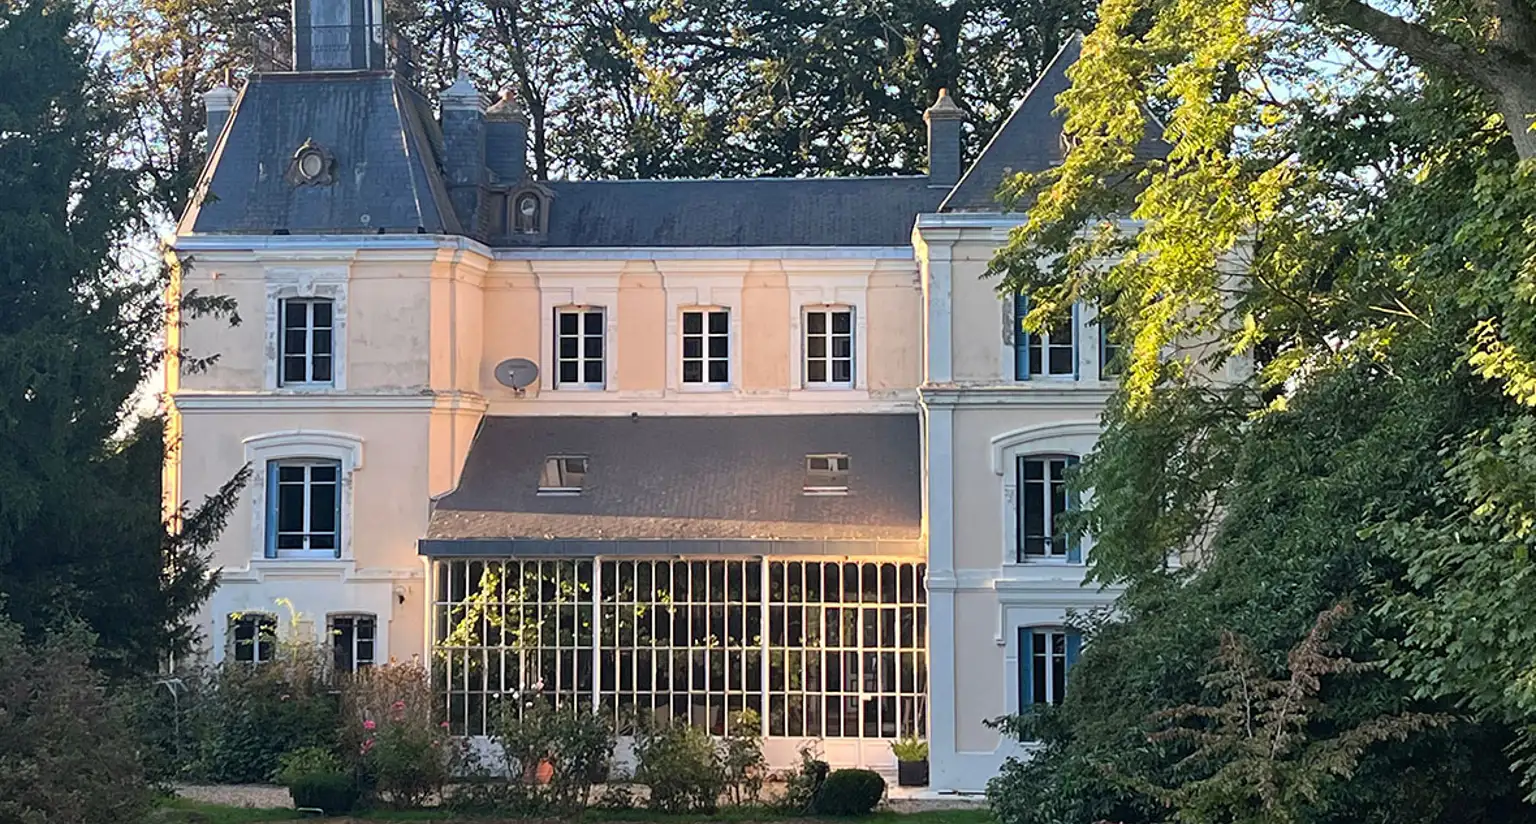 Buying a Château to renovate